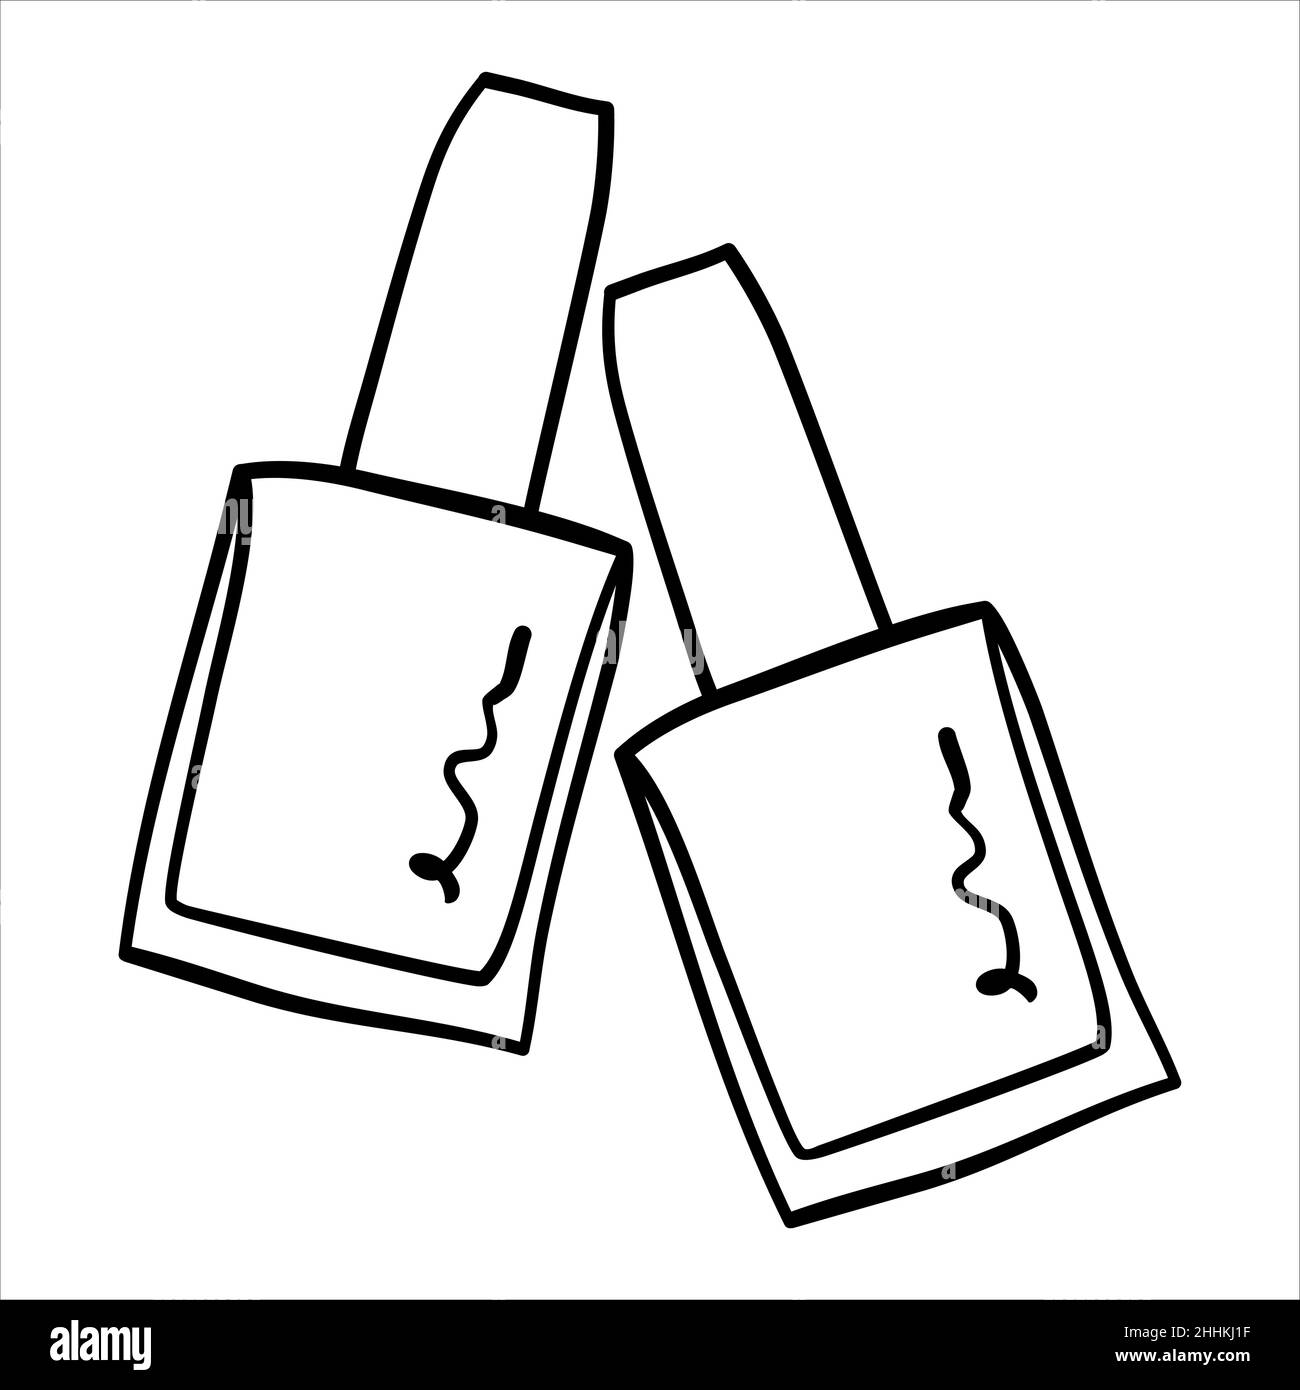 Nail polish bottles silhouette for manicure industry. Minimalist black laquer bottle in hand drawn outline style Stock Vector